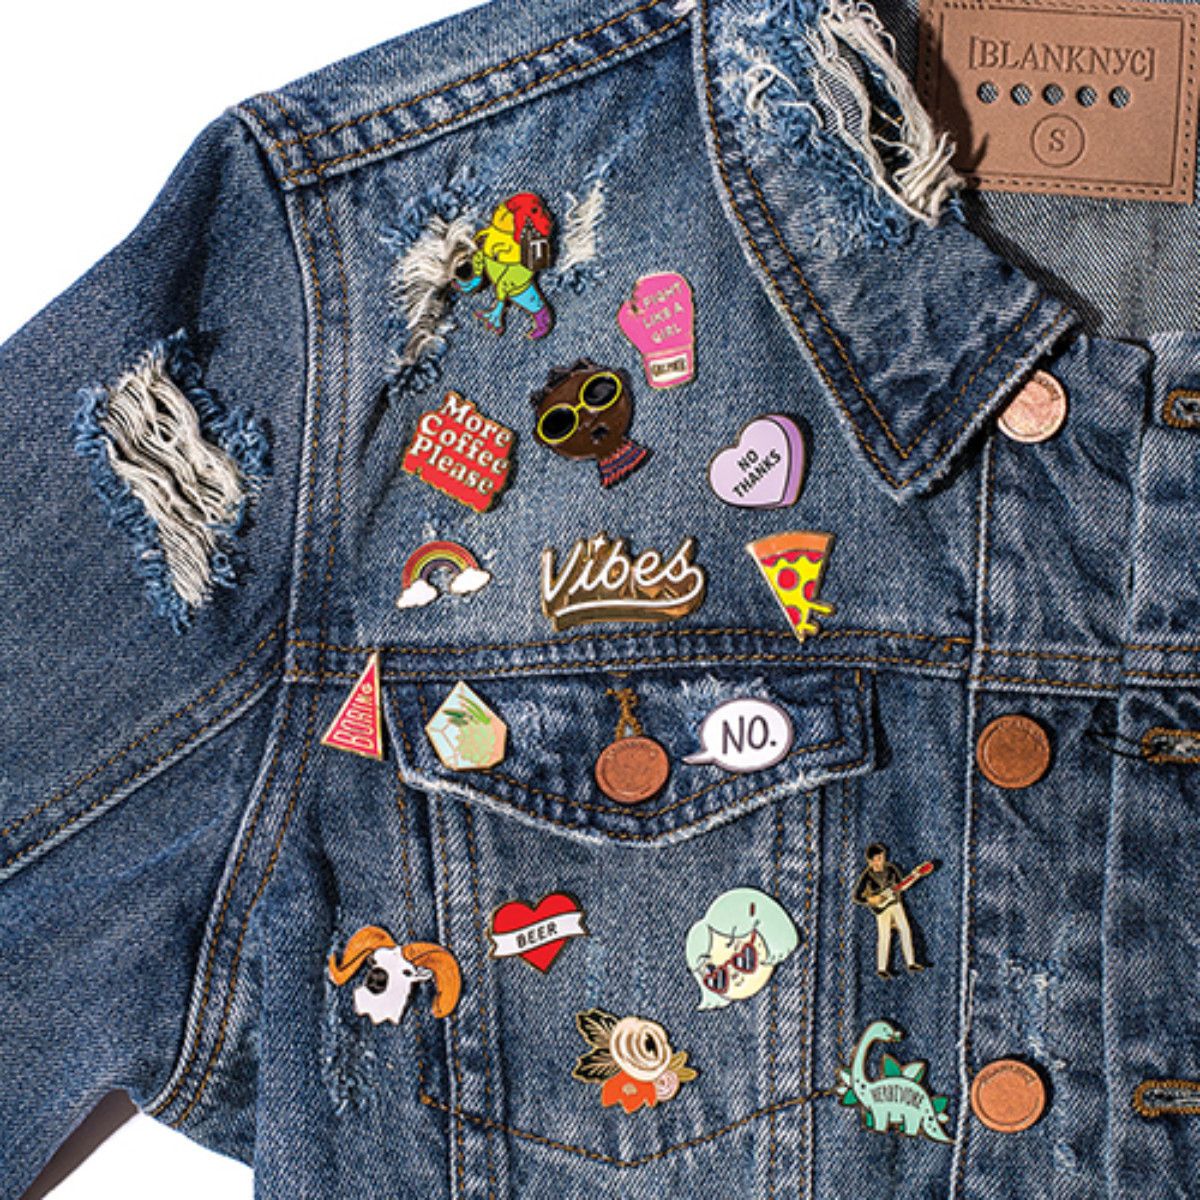 Pins On Denim Jacket
 Pick Up Unique Enamel Pins From These Local Artists